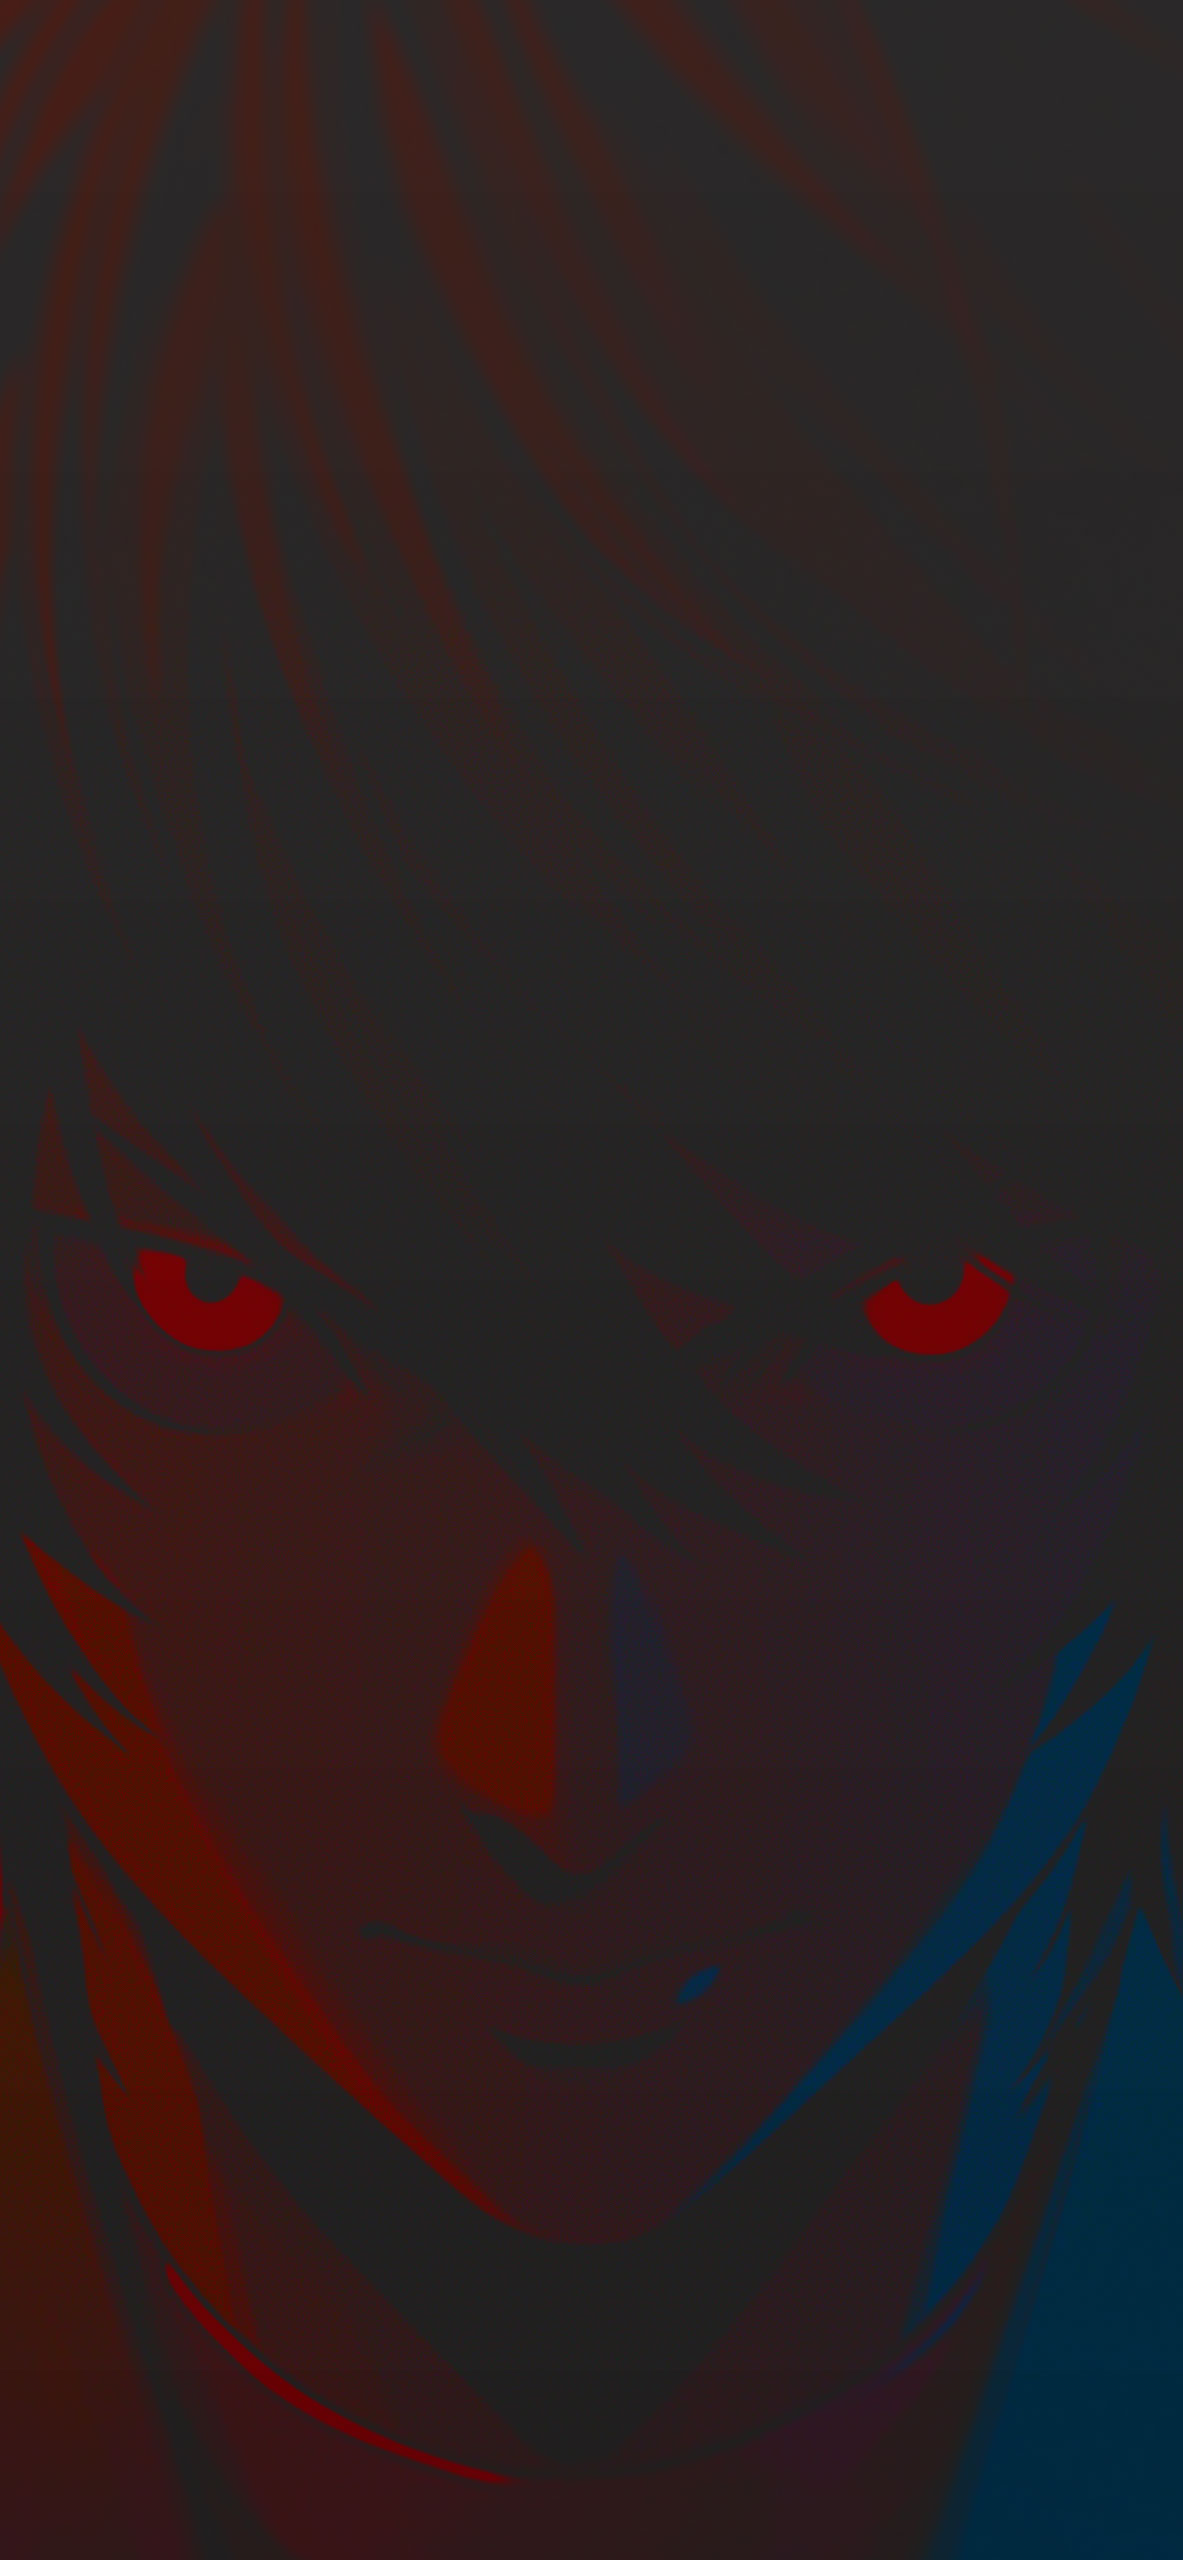 Death note L amoled wallpaper Anime dark wallpaper for iphone